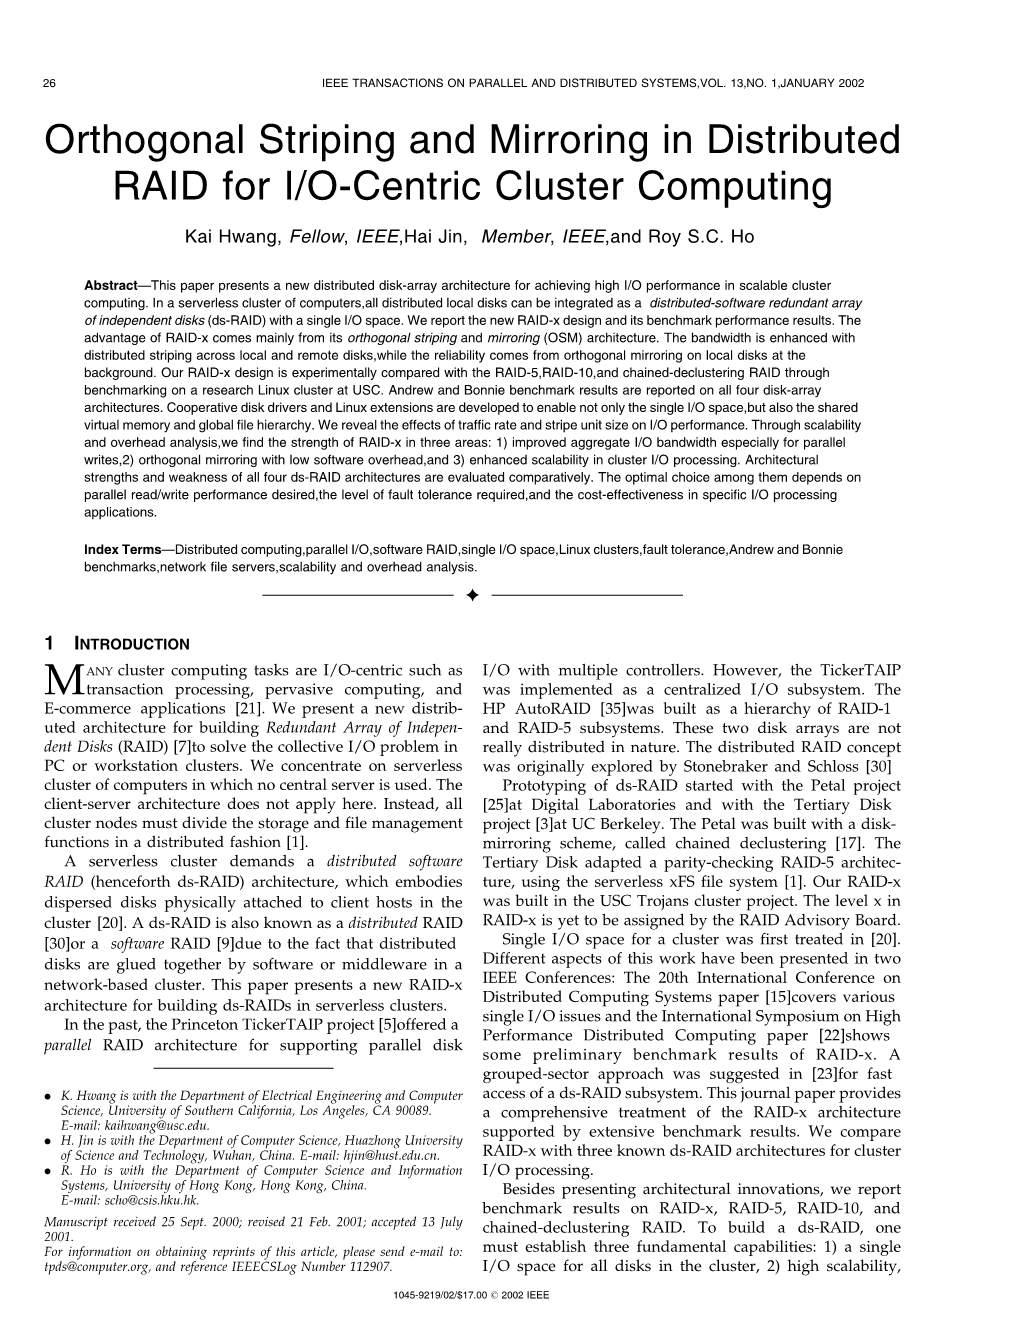 Orthogonal Striping and Mirroring in Distributed RAID for I/O-Centric Cluster Computing